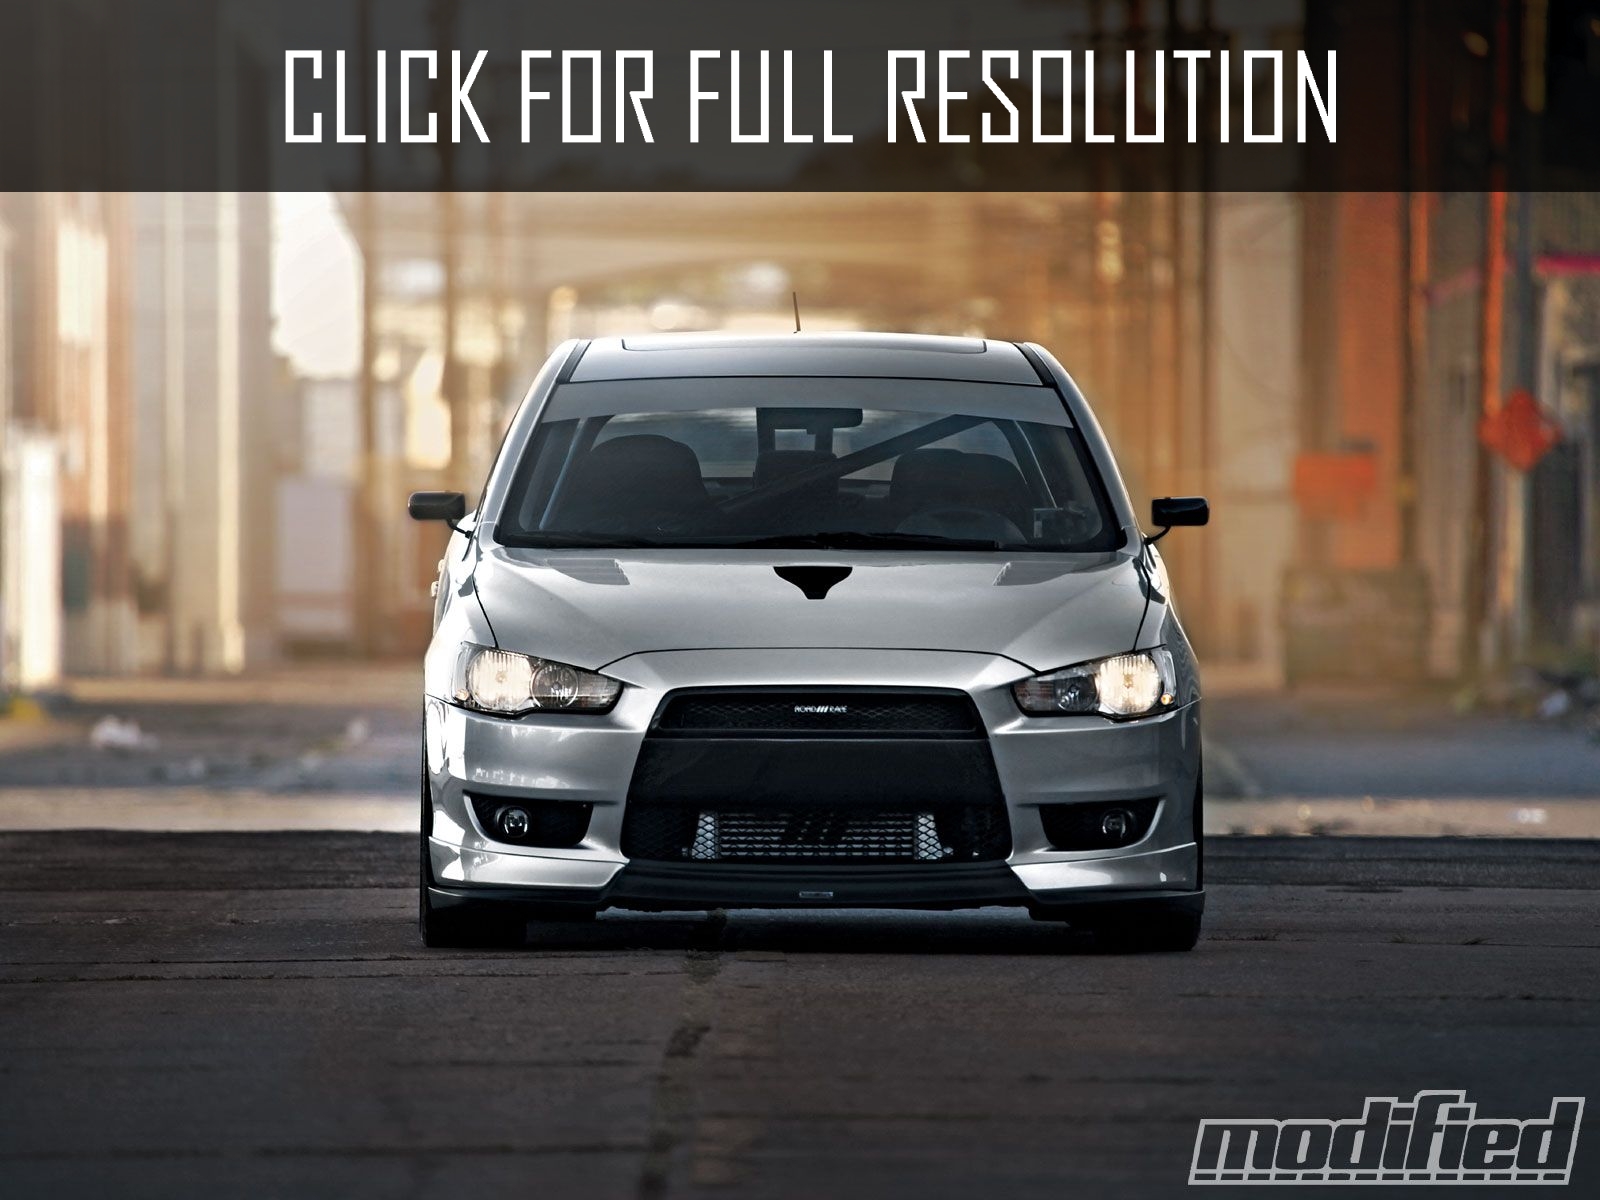 Mitsubishi Lancer Gts News Reviews Msrp Ratings With Amazing Images